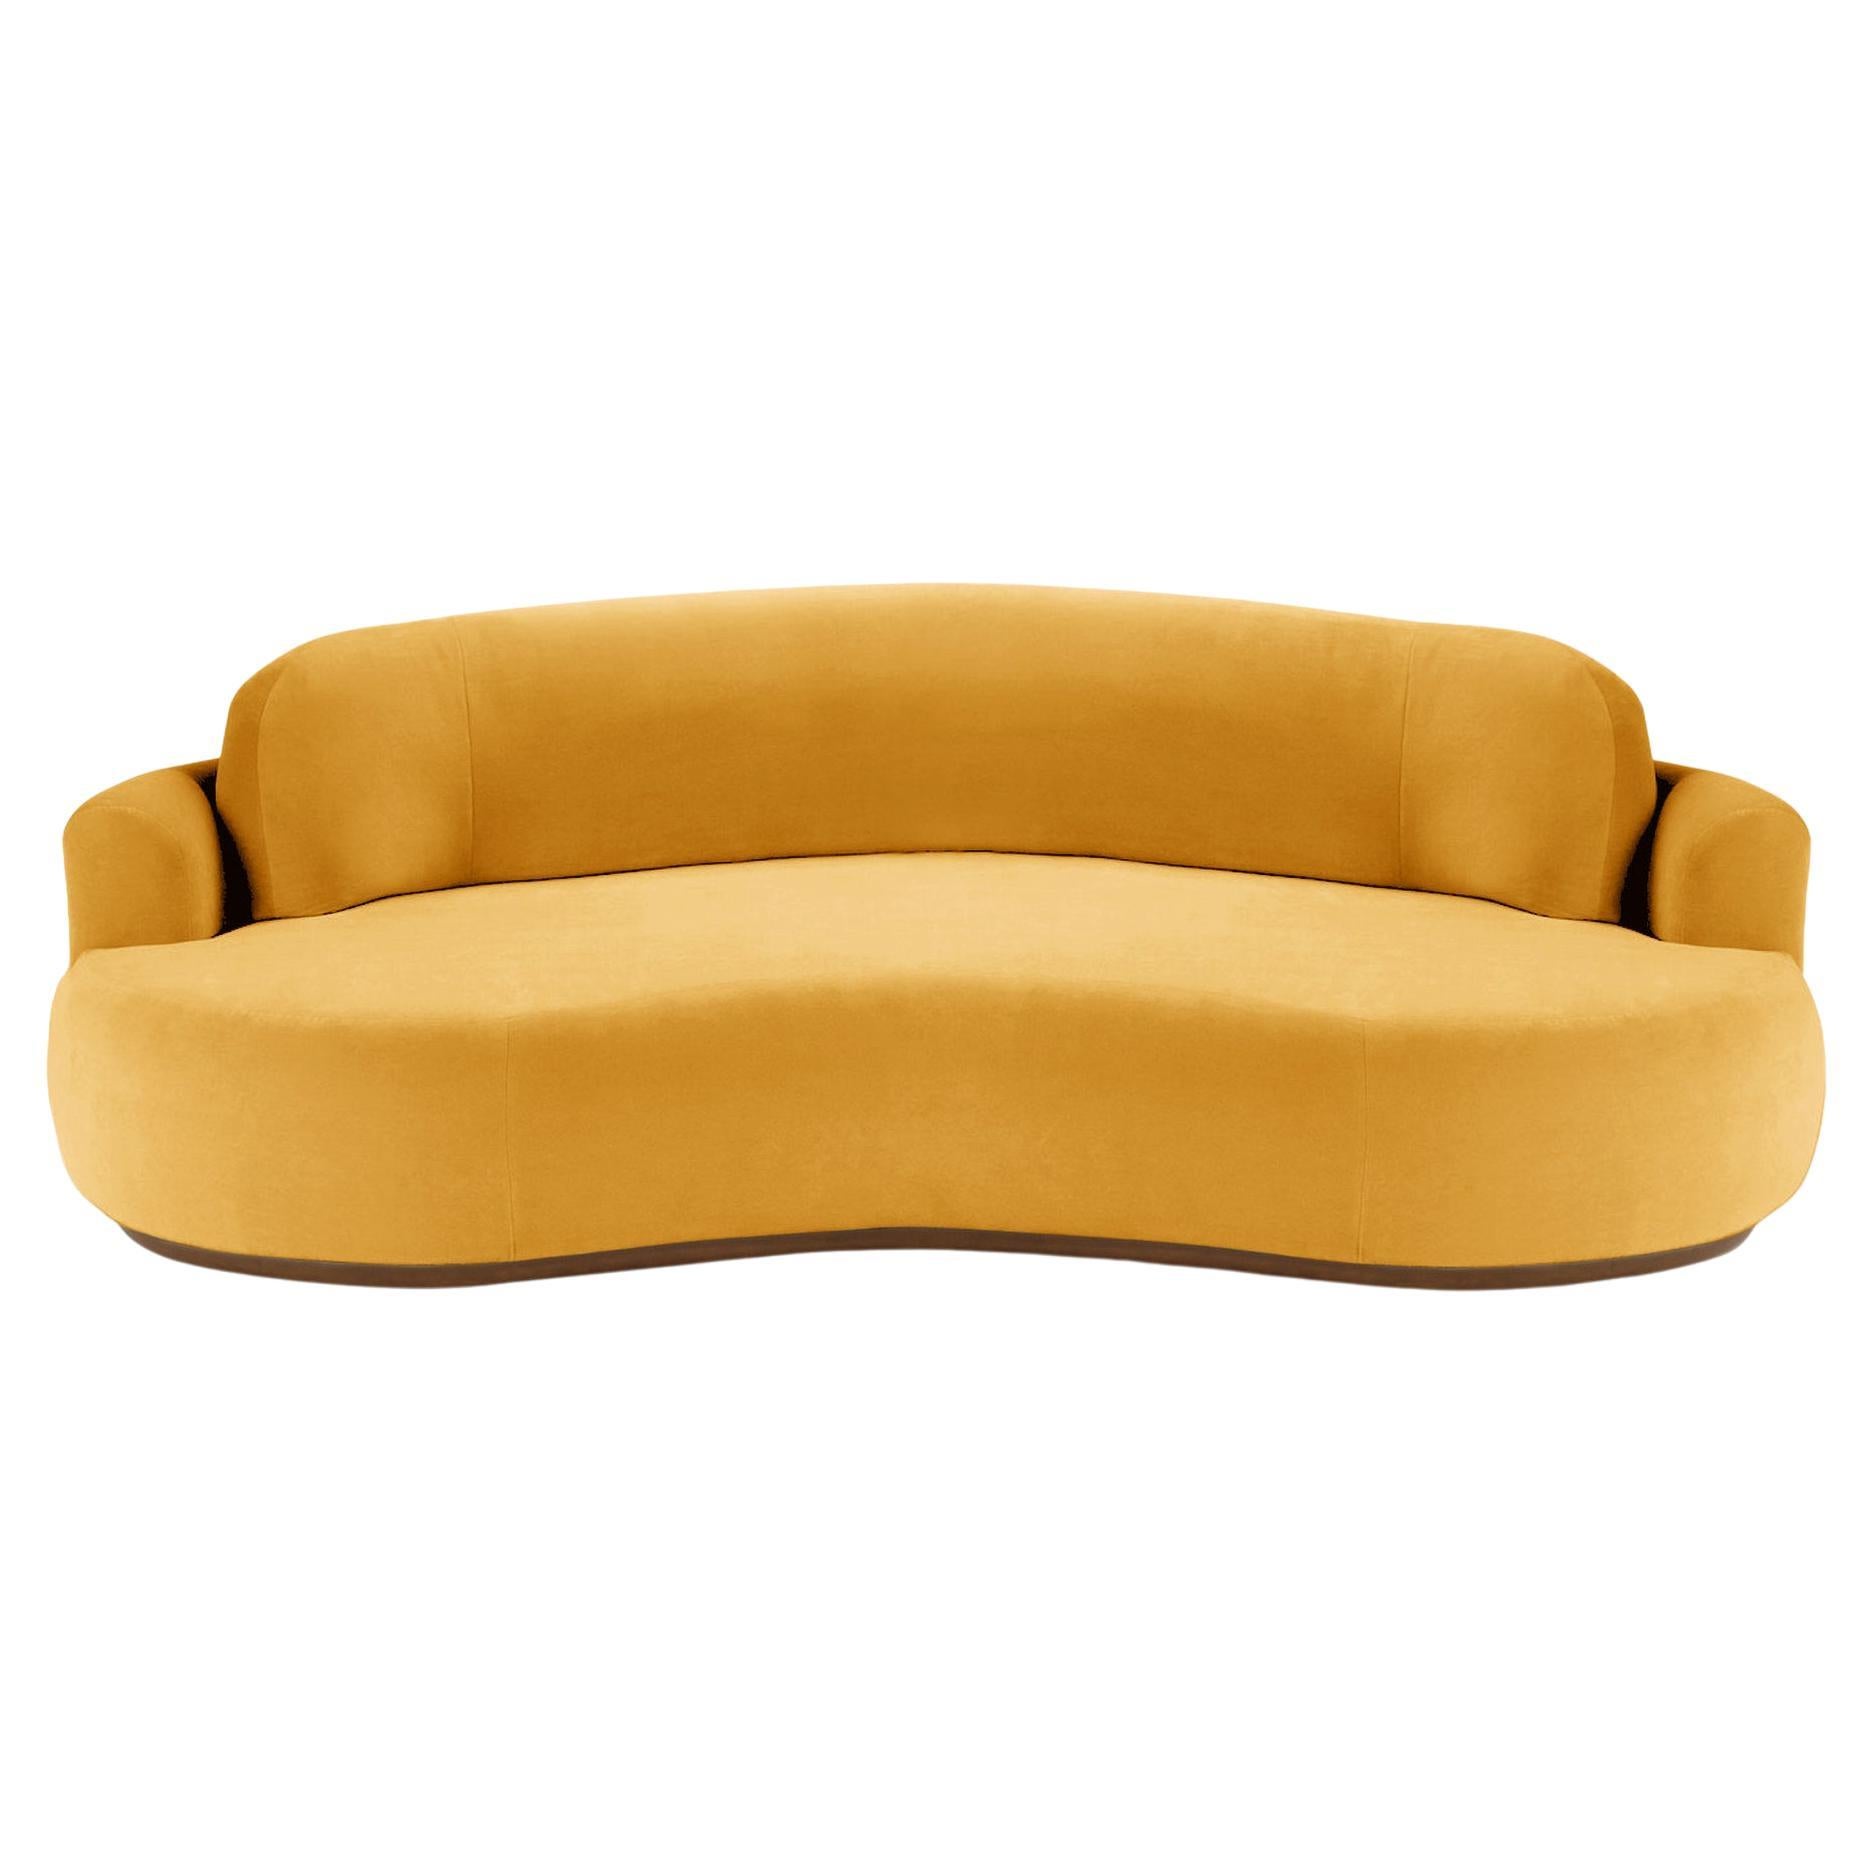 Naked Round Sofa, Medium with Beech Ash-056-1 and Corn For Sale